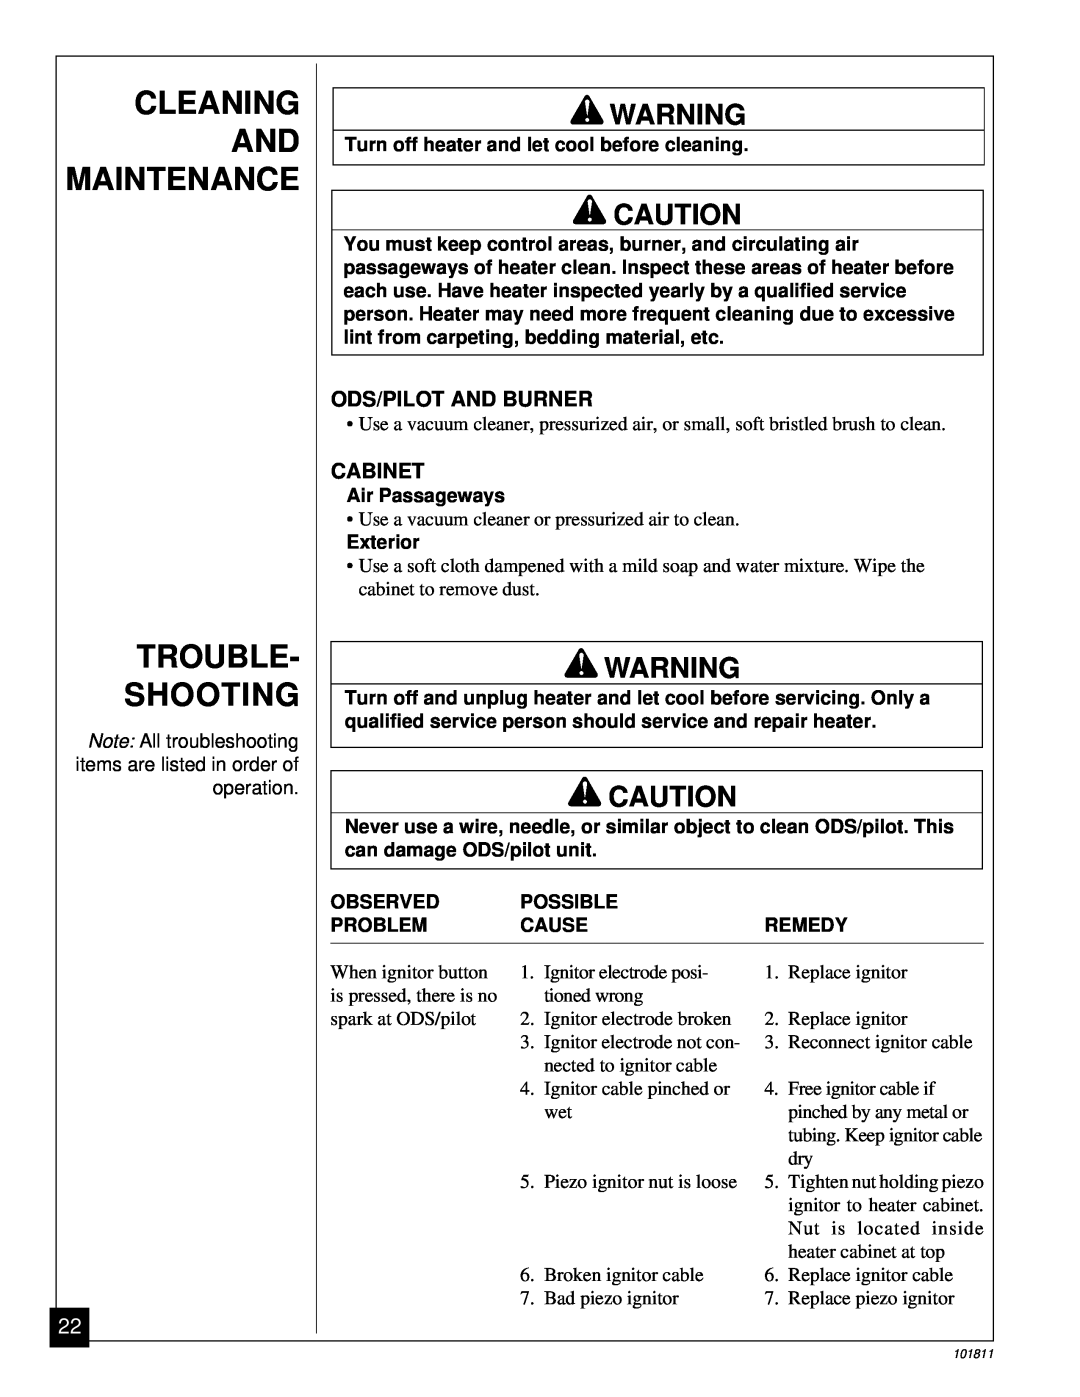 Desa 101811-01C.pdf installation manual Cleaning And Maintenance Trouble Shooting, Ods/Pilot And Burner, Cabinet 